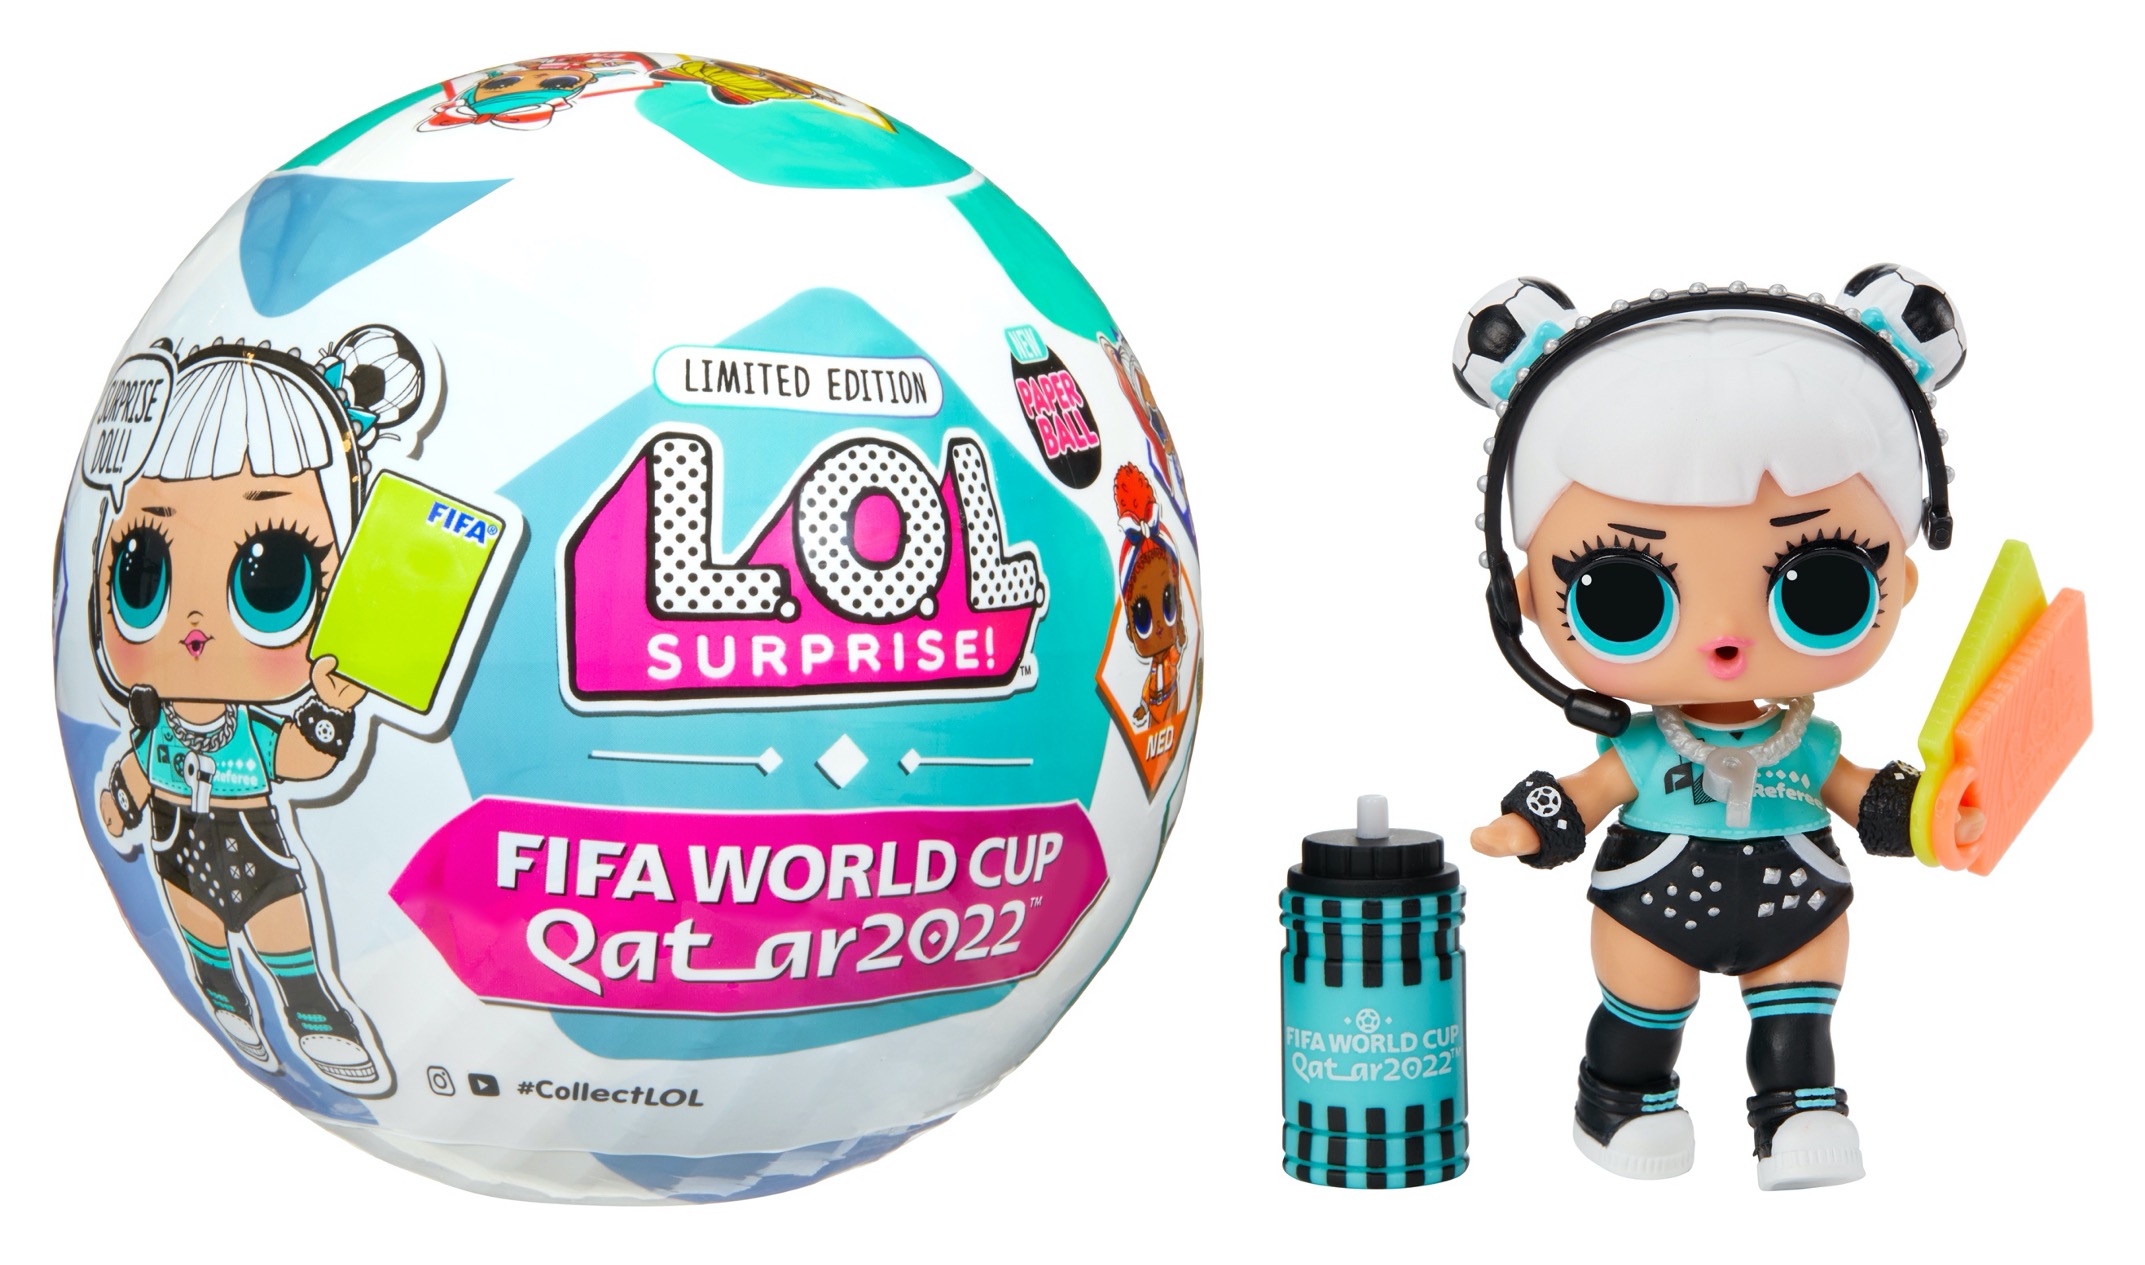 L.O.L. Surprise!™ x FIFA World Cup Qatar 2022™ Collaboration  Encourages Fans to ‘Let Their Champion Out’